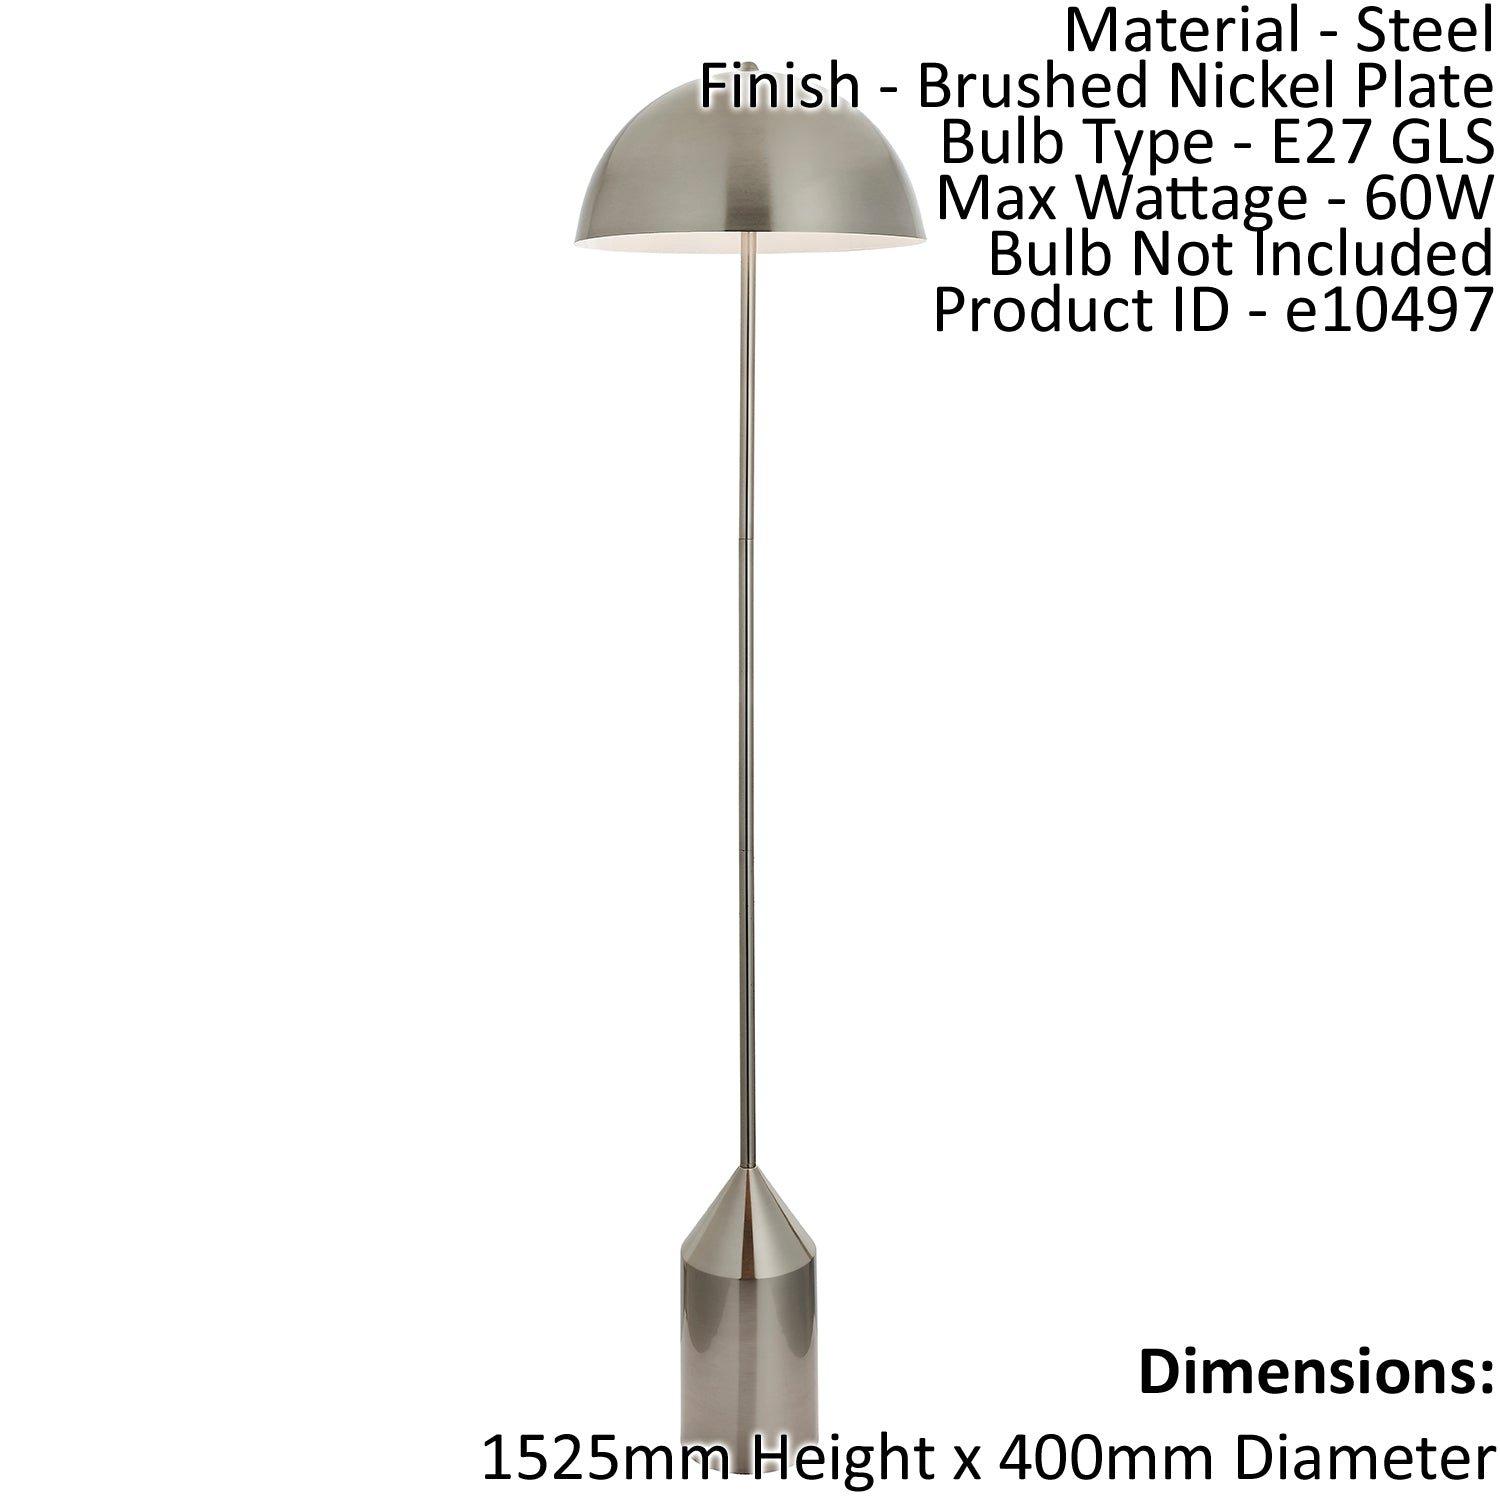 Floor Lamp Light Brushed Nickel Plate 60W E27 Complete Standing Lamp